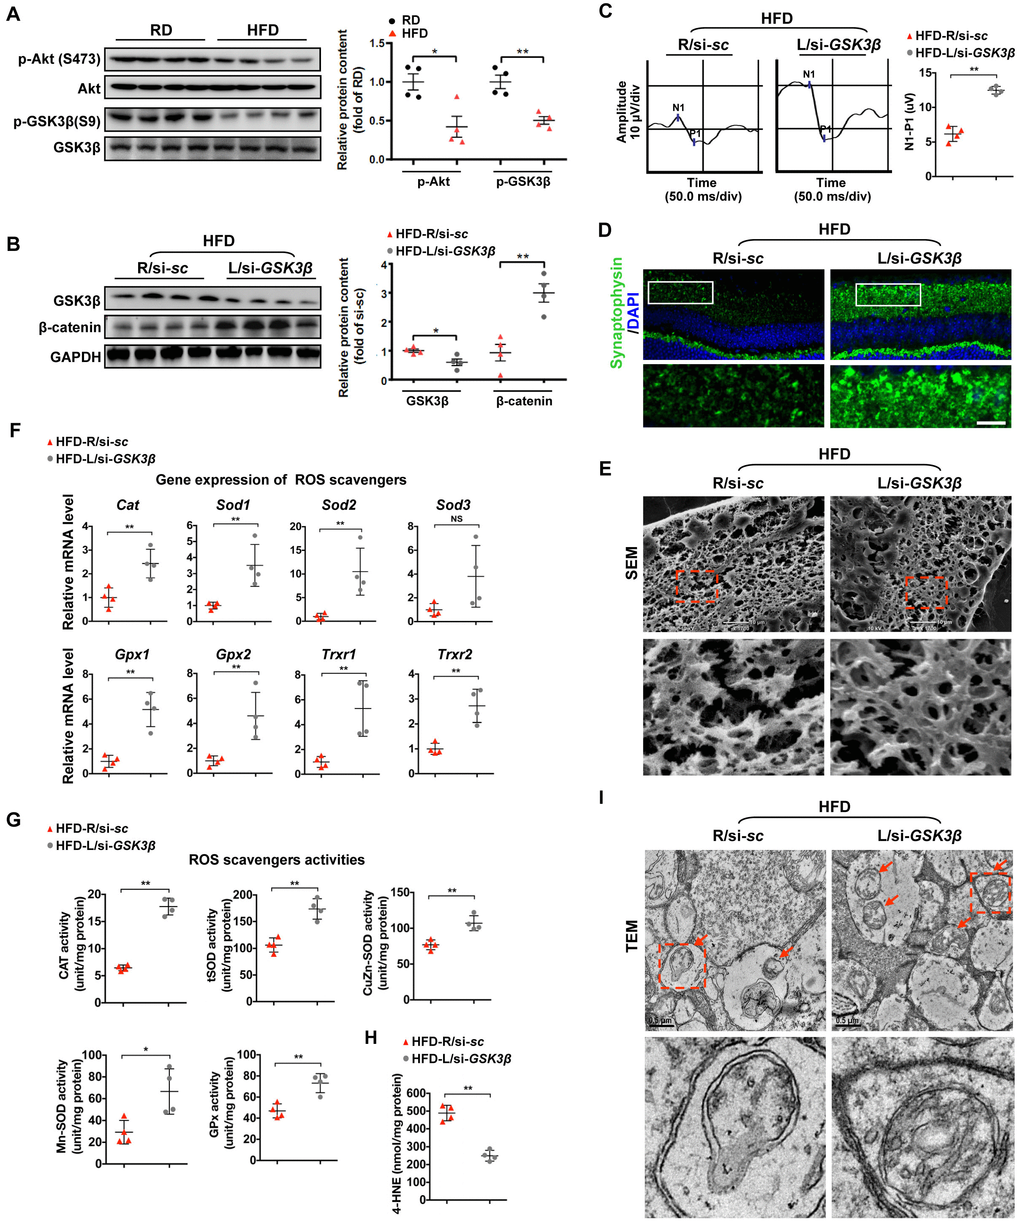 Restoring β-catenin by GSK3β inhibition protects diabetic retinae from mitochondrial and synaptic defect. (A) Western blotting analyses of phosphorylated-Akt (S473), Akt, phosphorylated-GSK3β (S9), and GSK3β in retinae from mice fed with RD or HFD, respectively. Relative intensities were quantified and normalized against the level of Akt or GSK GSK3β, respectively. (B–I) si-GSK3β was intravitreally injected in the left eye of HFD-fed mice (HFD-L/si-GSK3β), while a scramble si-sc was injected in the contralateral right eye as a control (HFD-R/si-sc). (B) Western blotting for GSK3β and active β-catenin. Relative intensities were quantified. (C) Representative waveforms of VEP and quantification of differences in peak amplitude (N1-P1). (D) Retinal immunostaining for synaptophysin (green; scale bar, 100 μm). Areas boxed in are shown at higher magnification. (E) Representative images of retinal SEM. Lower panels are high-power magnification of boxed areas. Scale bar, 10 μm. (F) Relative mRNA expression of ROS scavenging genes in retinae. (G) Activities of antioxidant enzymes in retinae. (H) Contents of retinal 4-HNE. (I) Representative images of retinal TEM with mitochondria in IPL (arrows). Areas boxed in are shown at higher magnification. Scale bar, 0.5 μm. Data are means ± SEM. n = 4 mice (A) or n = 4 eyes (B–I) per group. *P **P *P **P sc. NS, no significant difference. See also Supplementary Figures 2D and 3D.